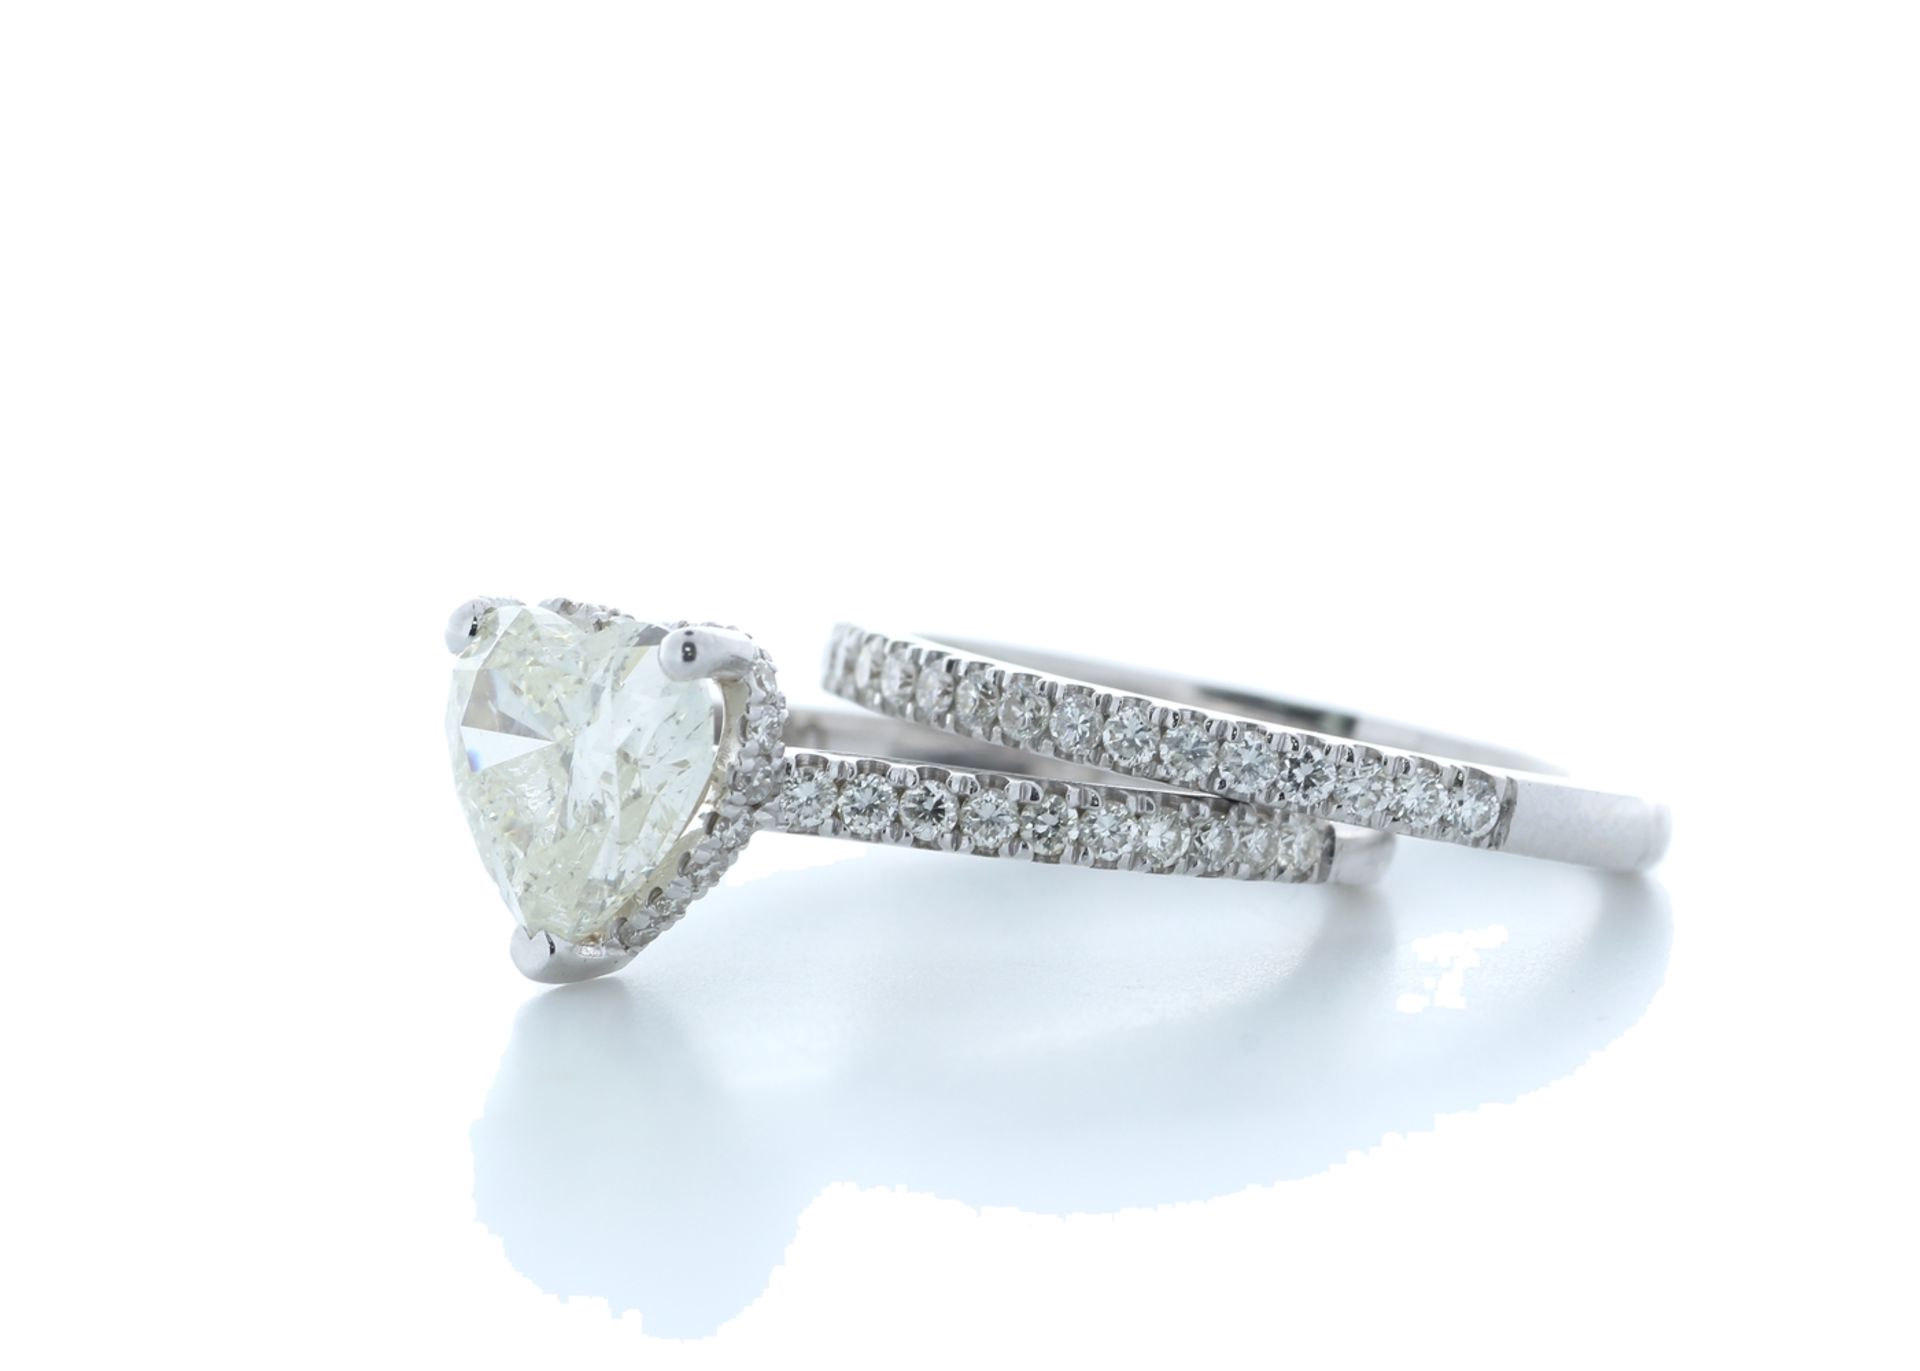 18ct White Gold Heart Shape Diamond Ring With Matching Band 2.22 (1.60) Carats - Image 2 of 5